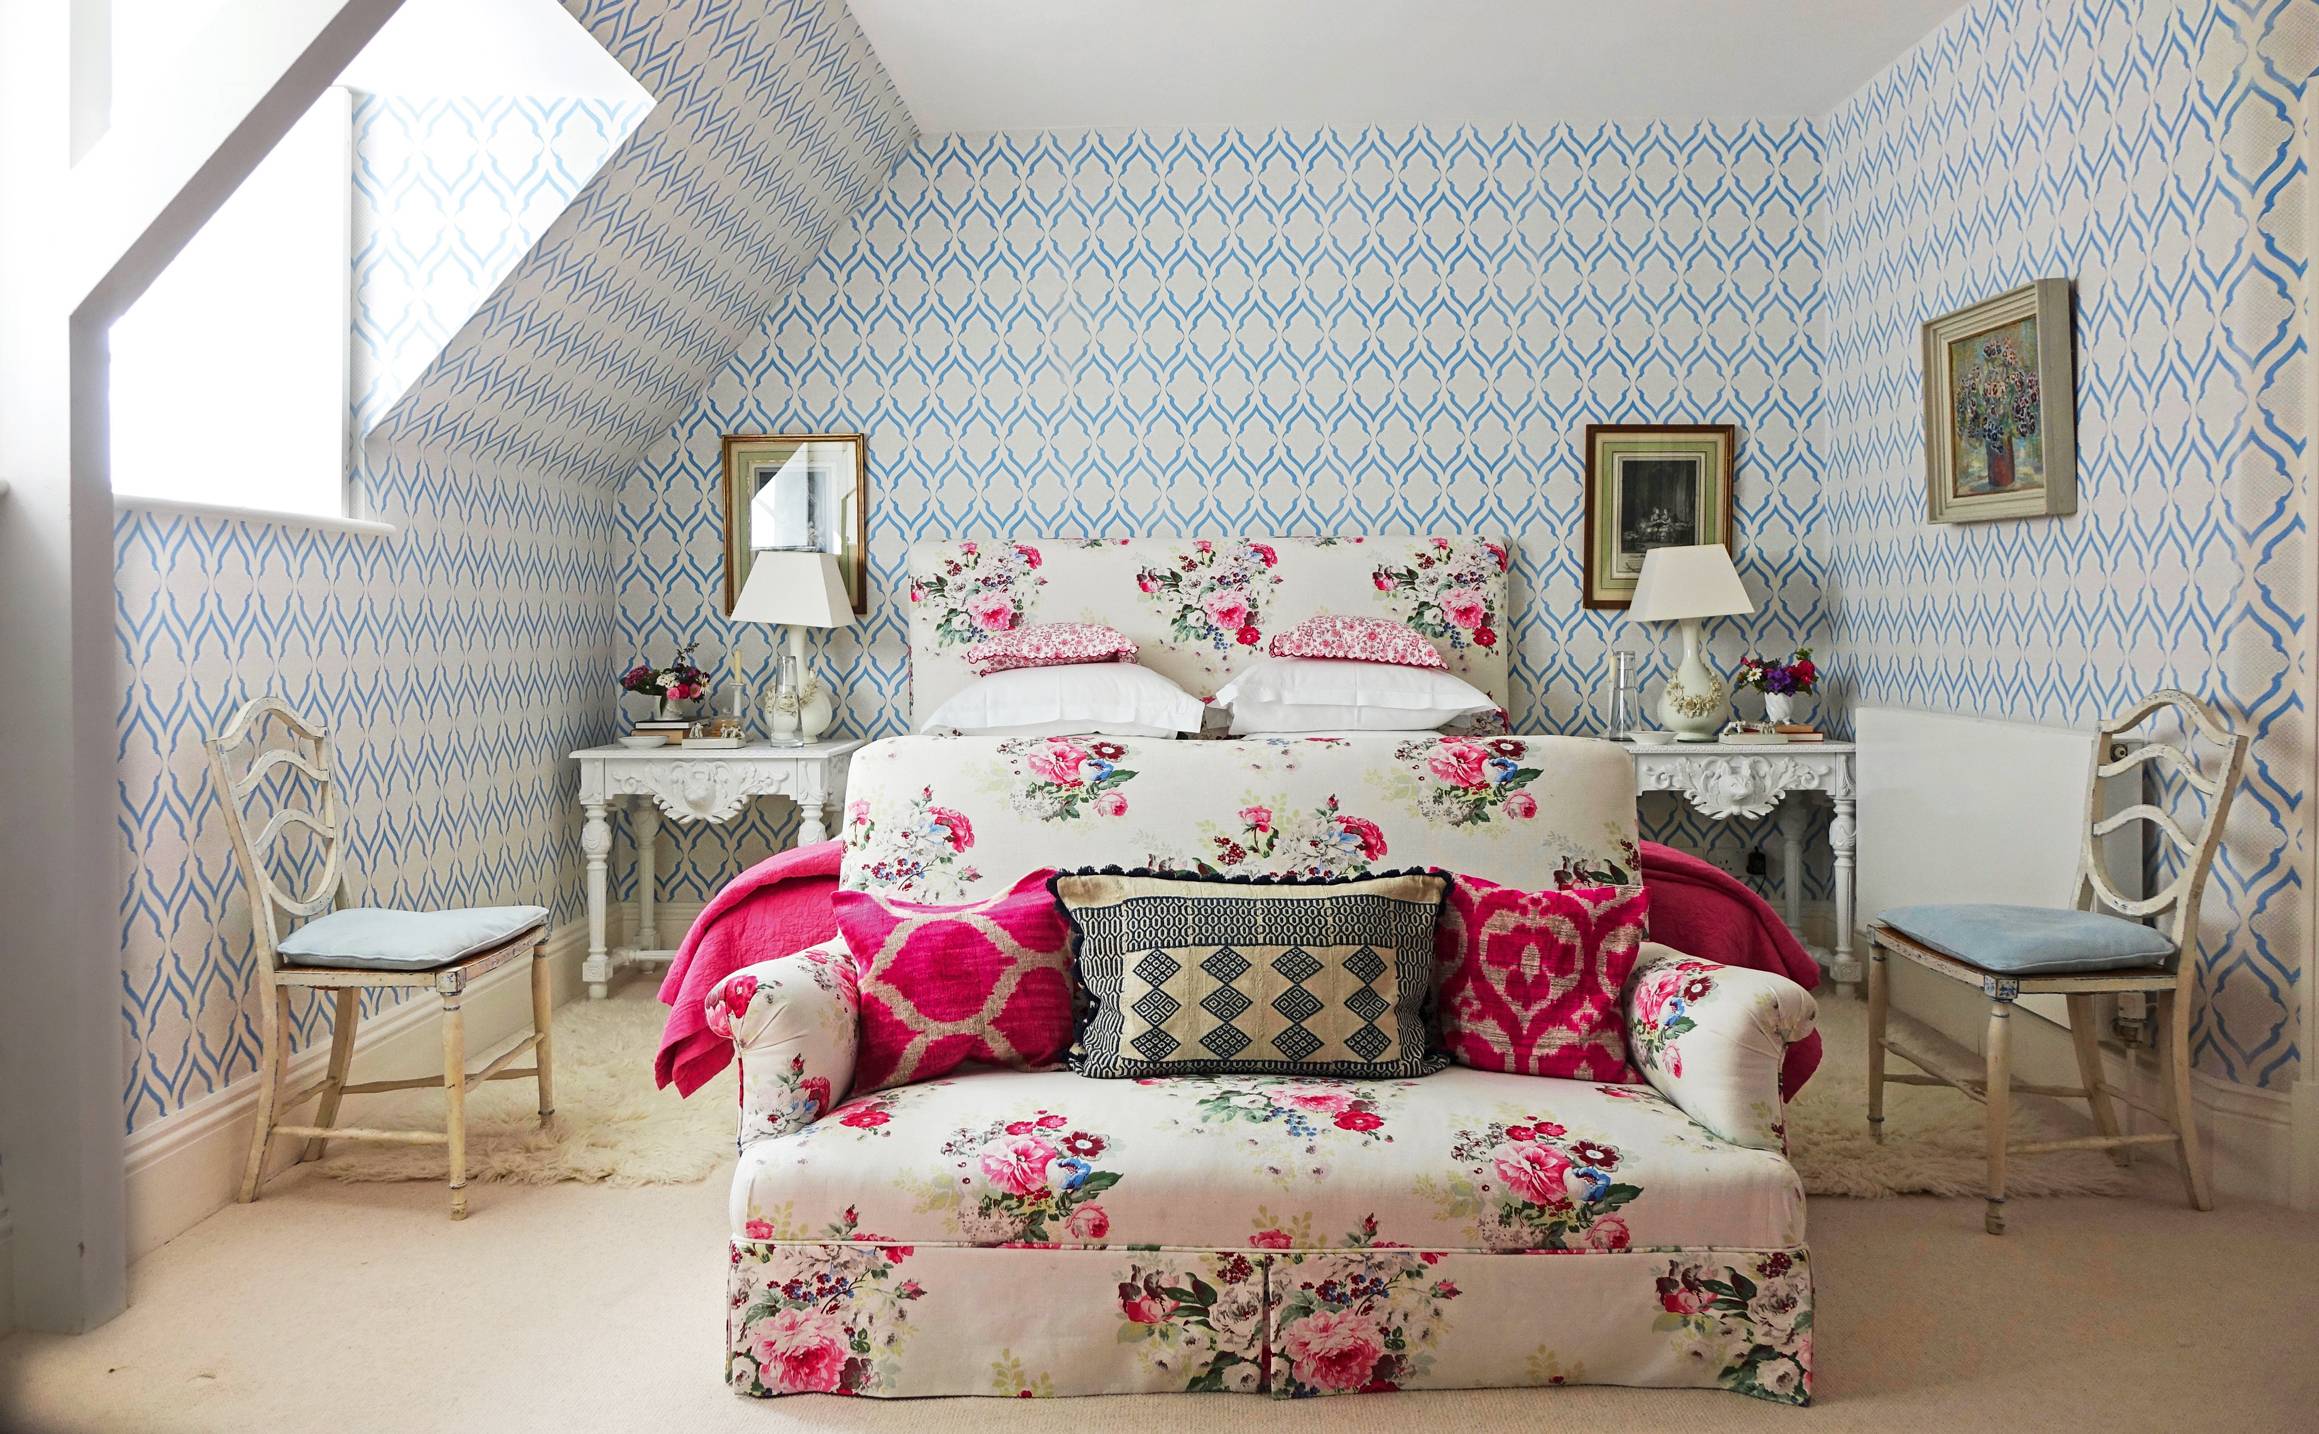 Cath Kidston's Cotswold house, Paradise 